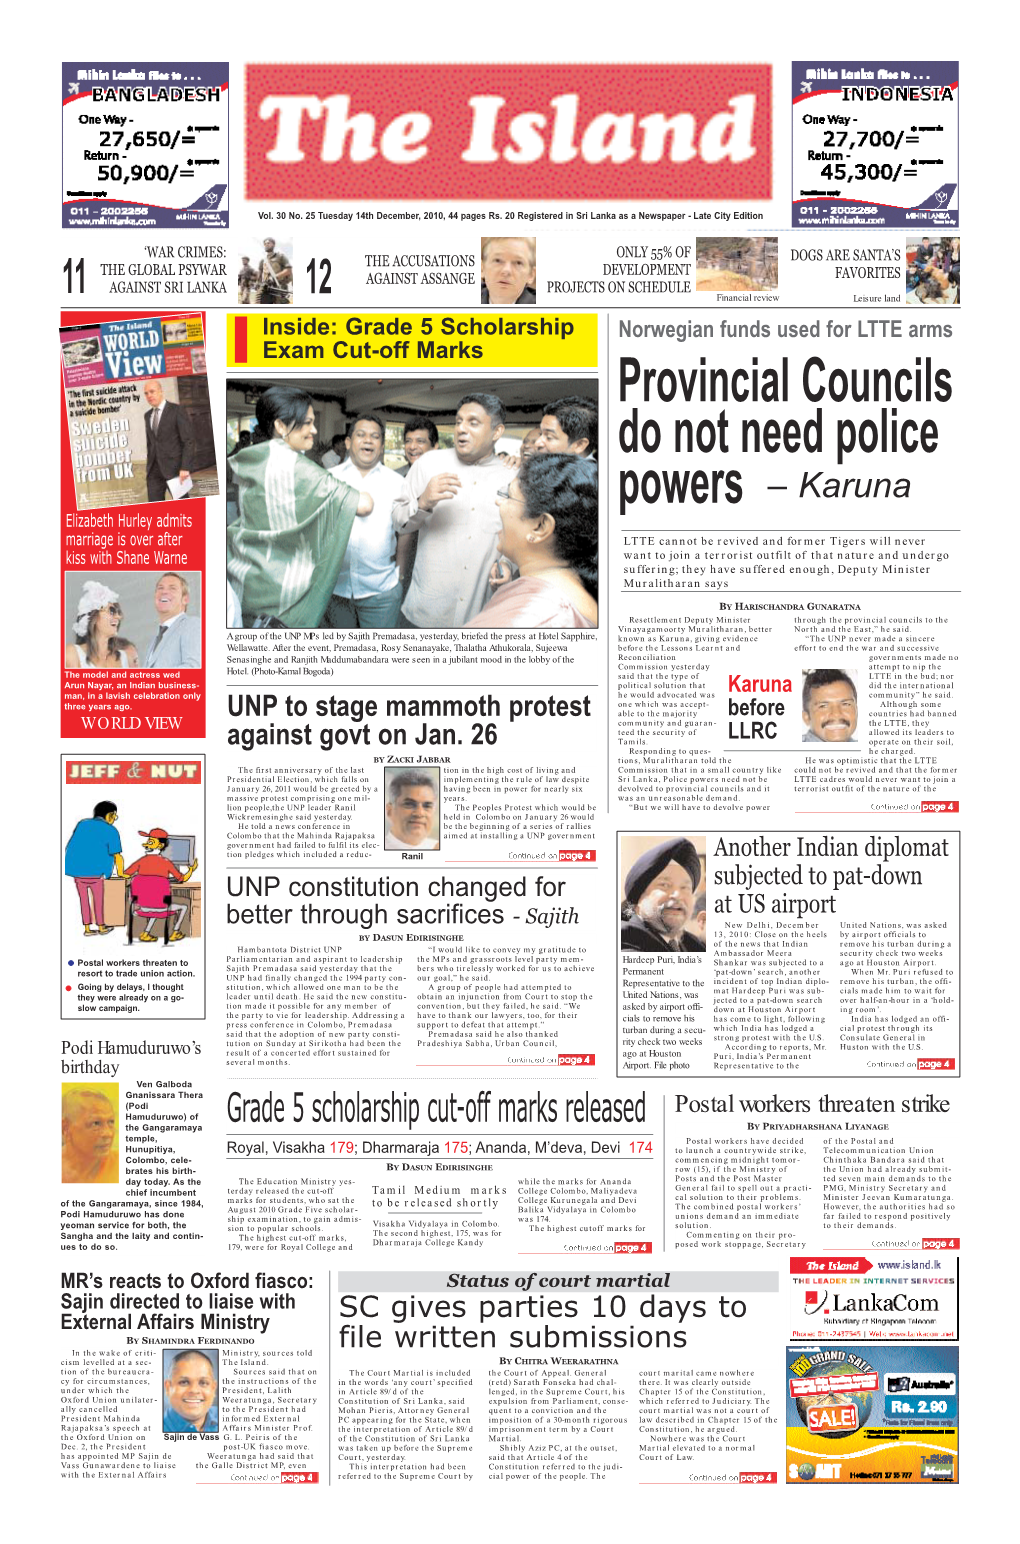 Provincial Councils Do Not Need Police Powers